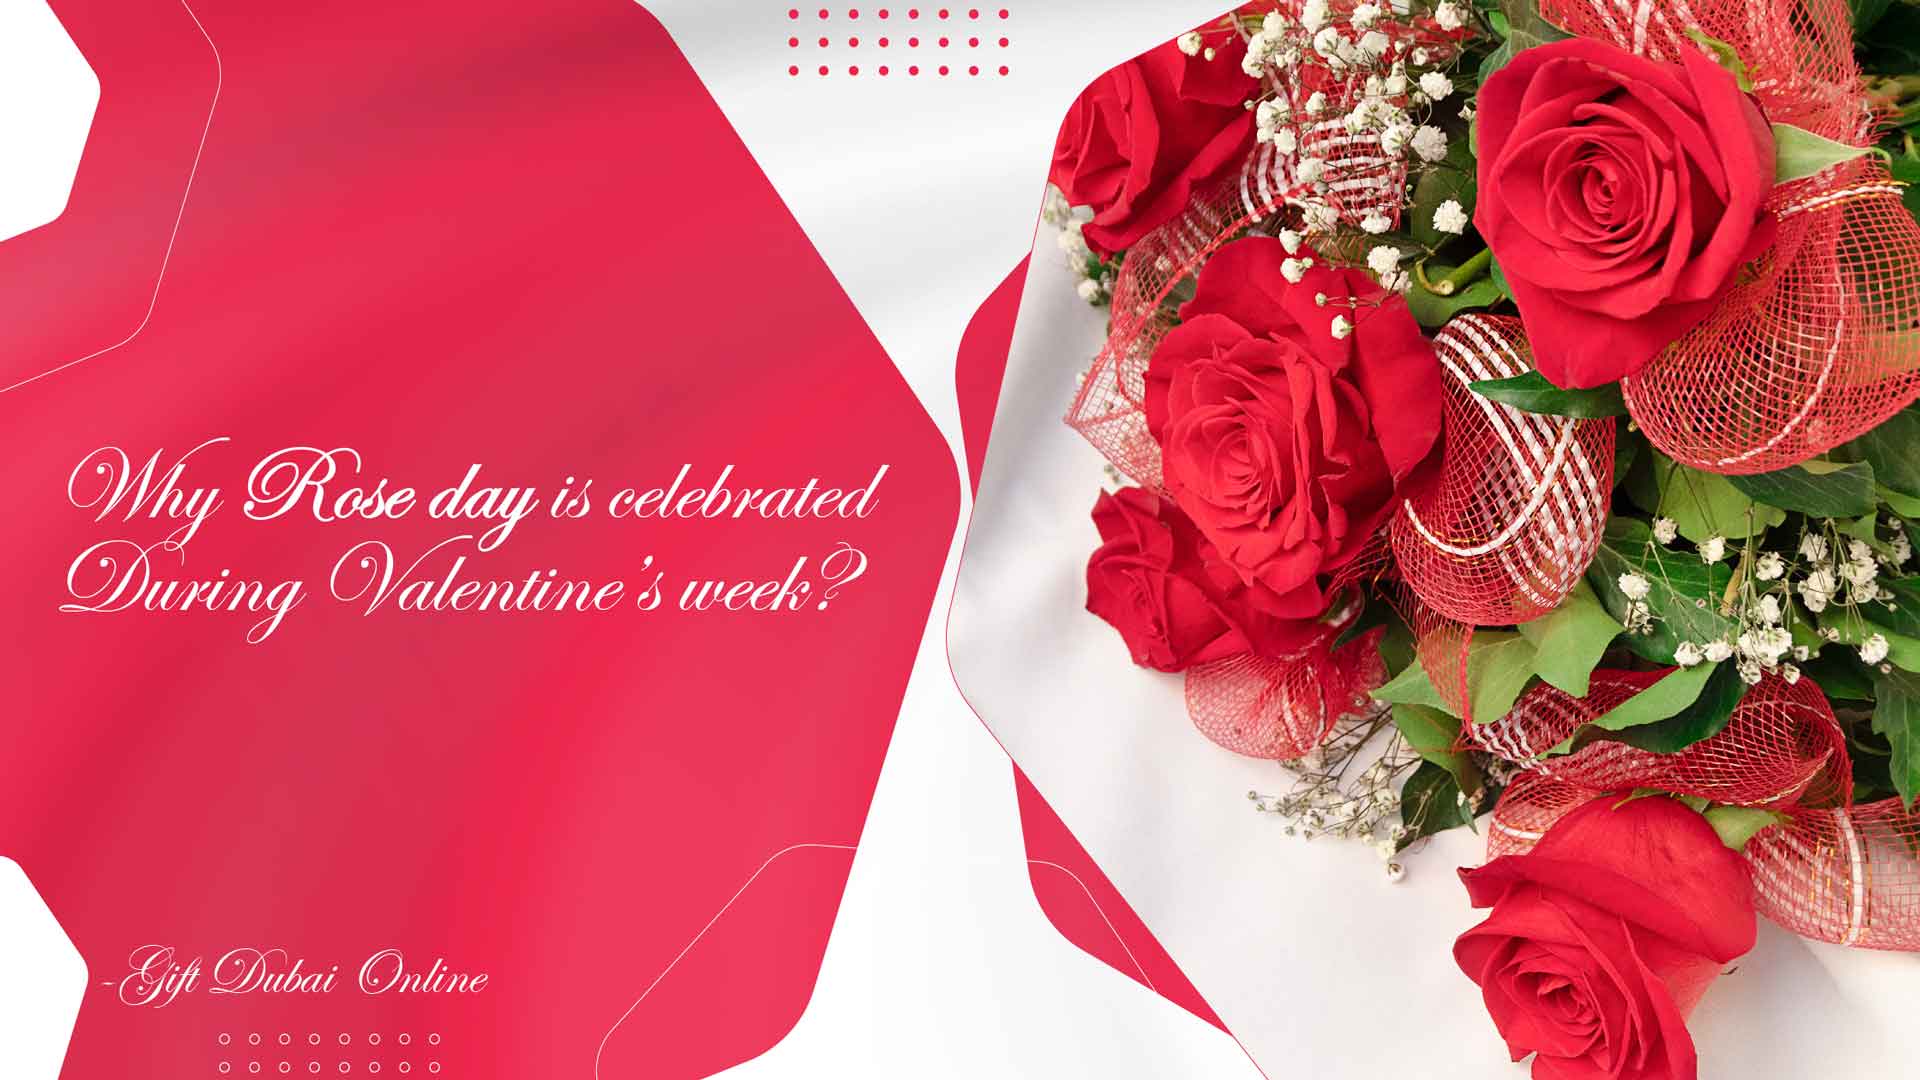 rose day gifts online